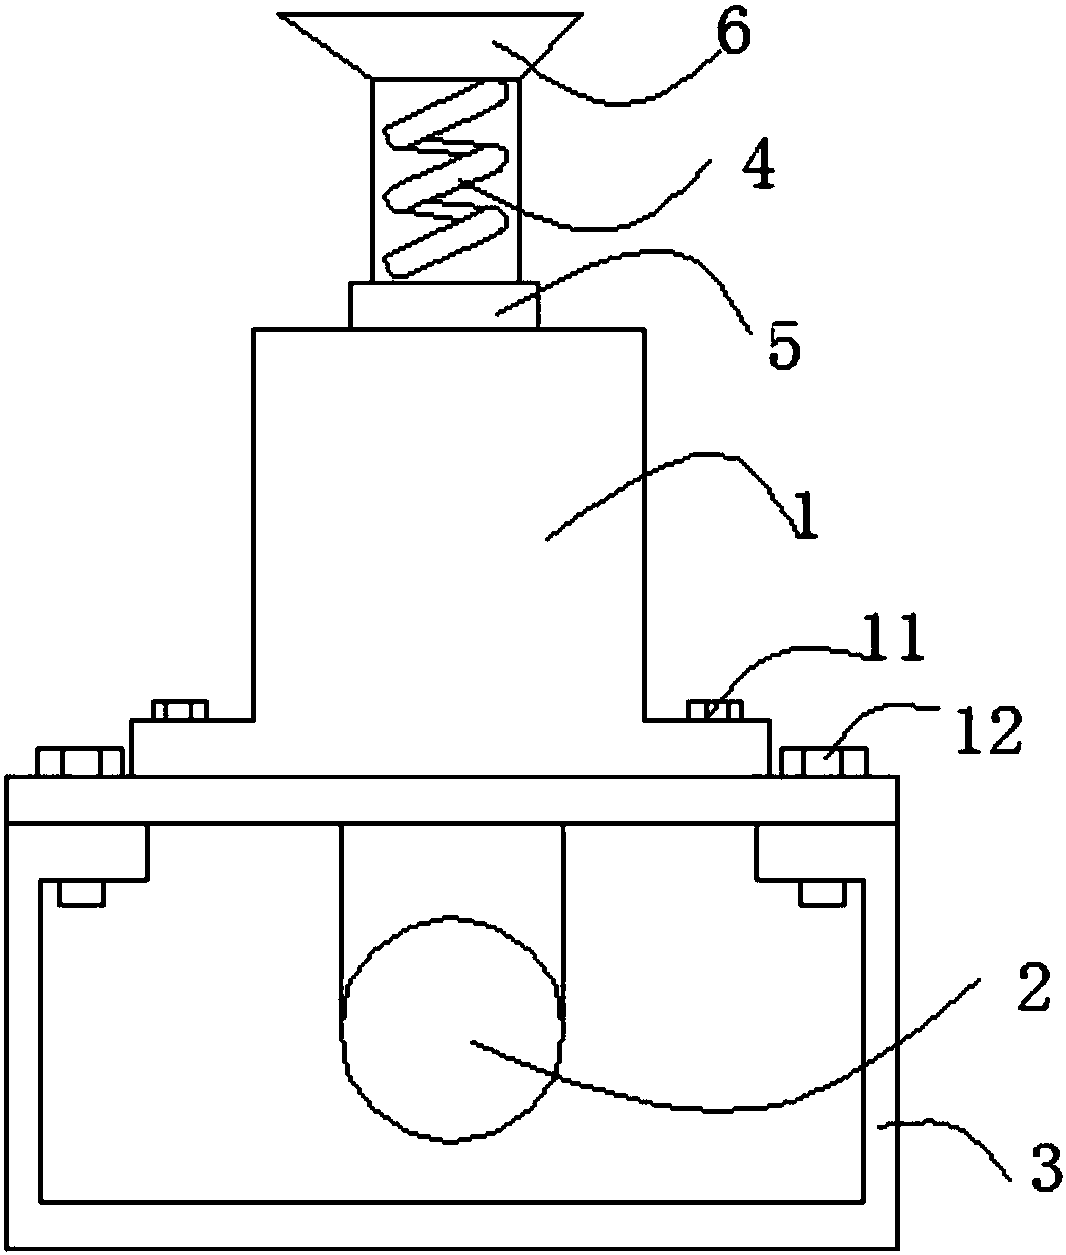 Grain breaking apparatus with spring hose inlets